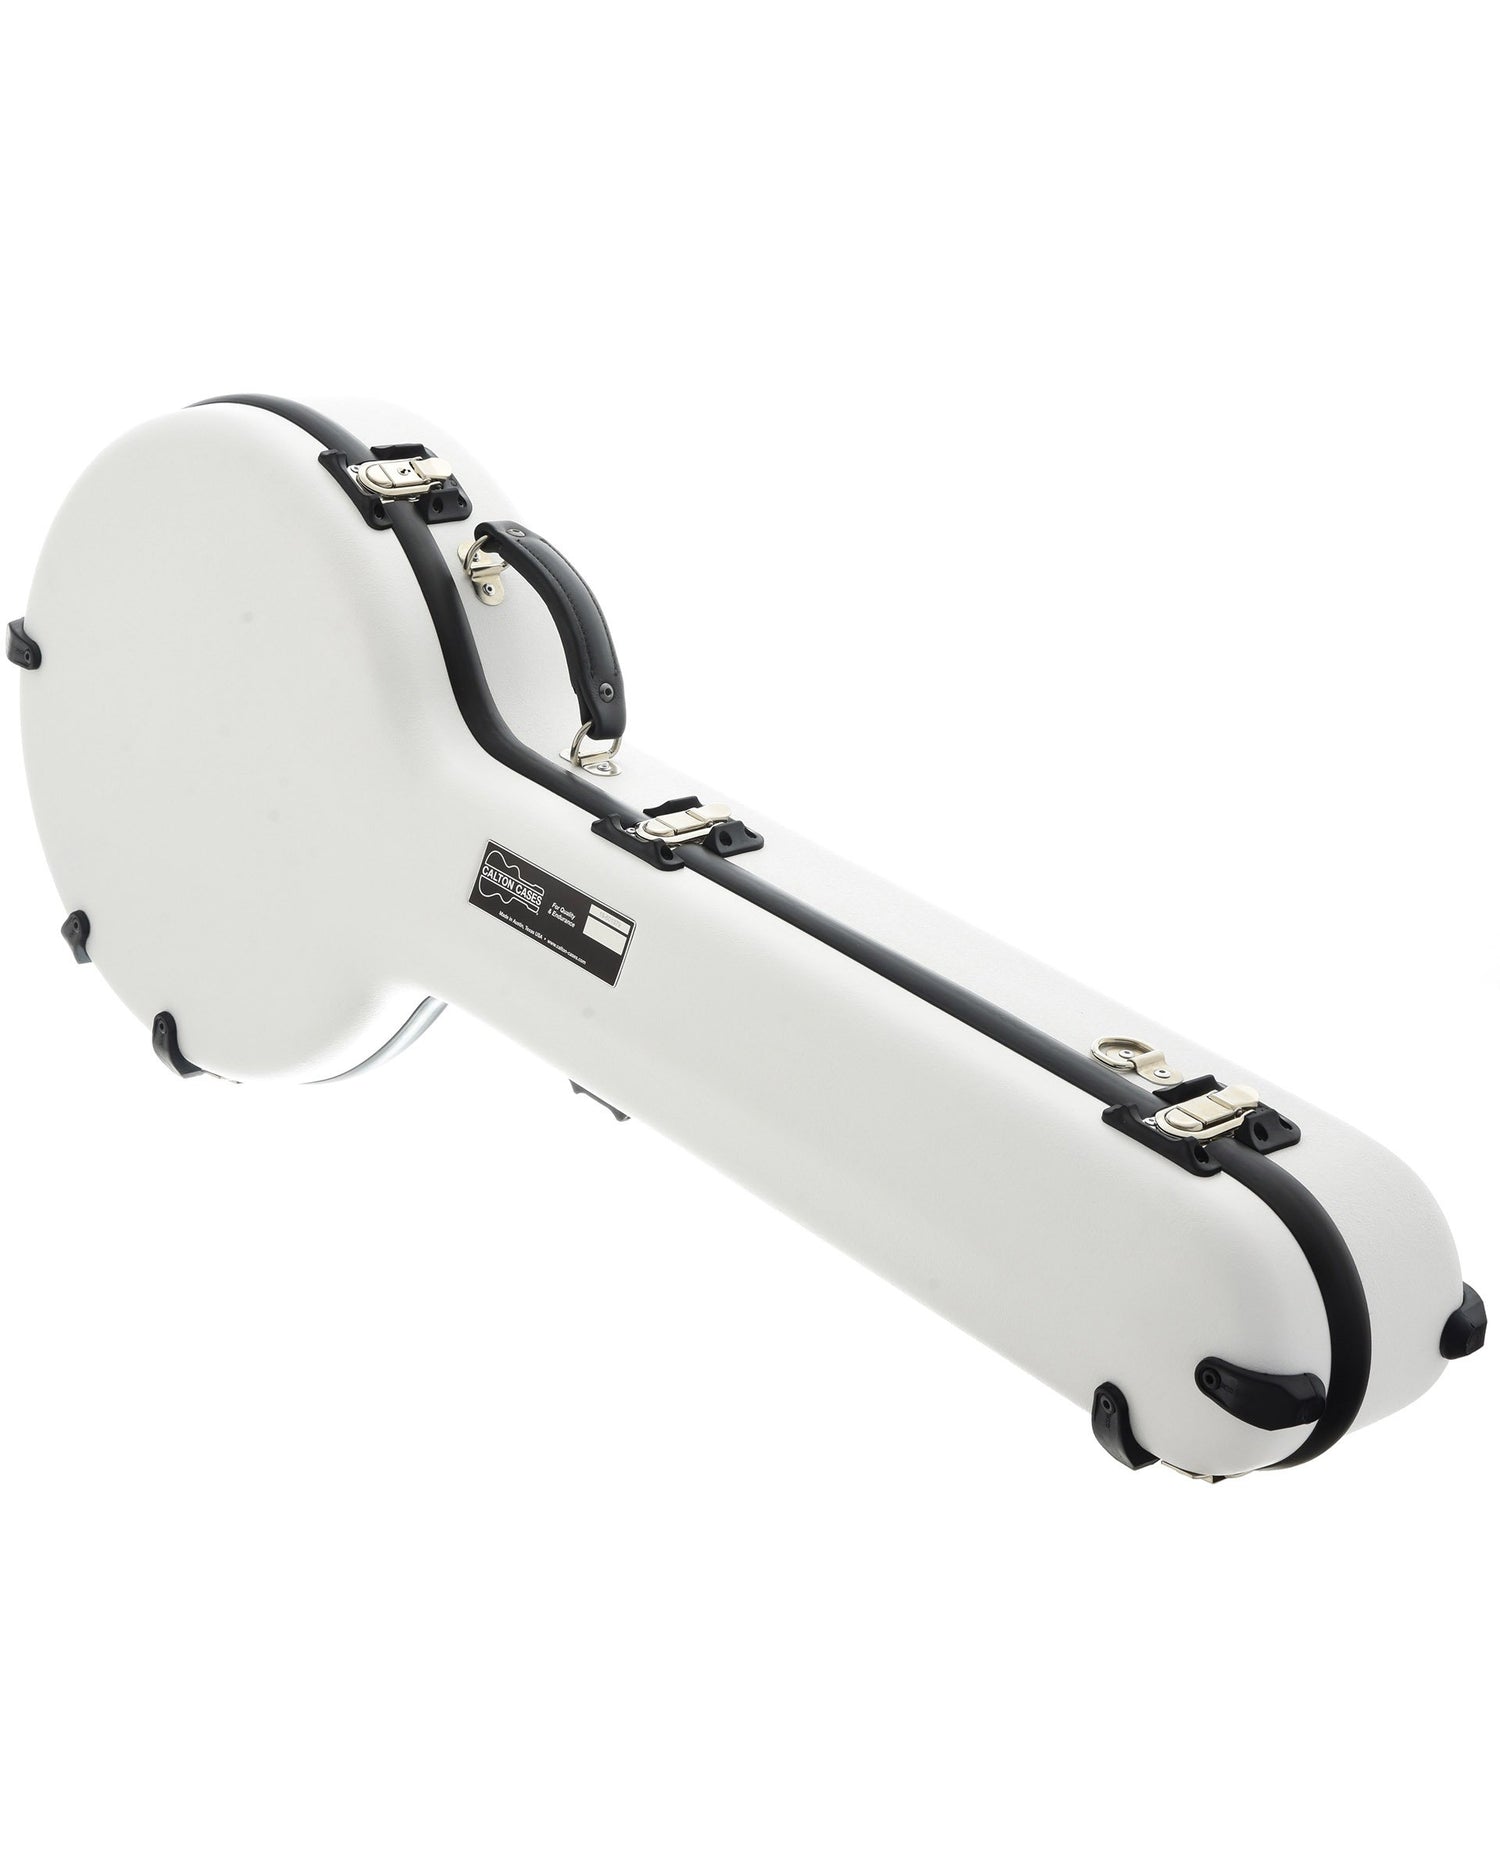 Image 1 of Calton Deluxe Banjo Case, Gibson 5-String Resonator Banjo, White w/Blue Lining - SKU# CBC1-WH/B : Product Type Accessories & Parts : Elderly Instruments